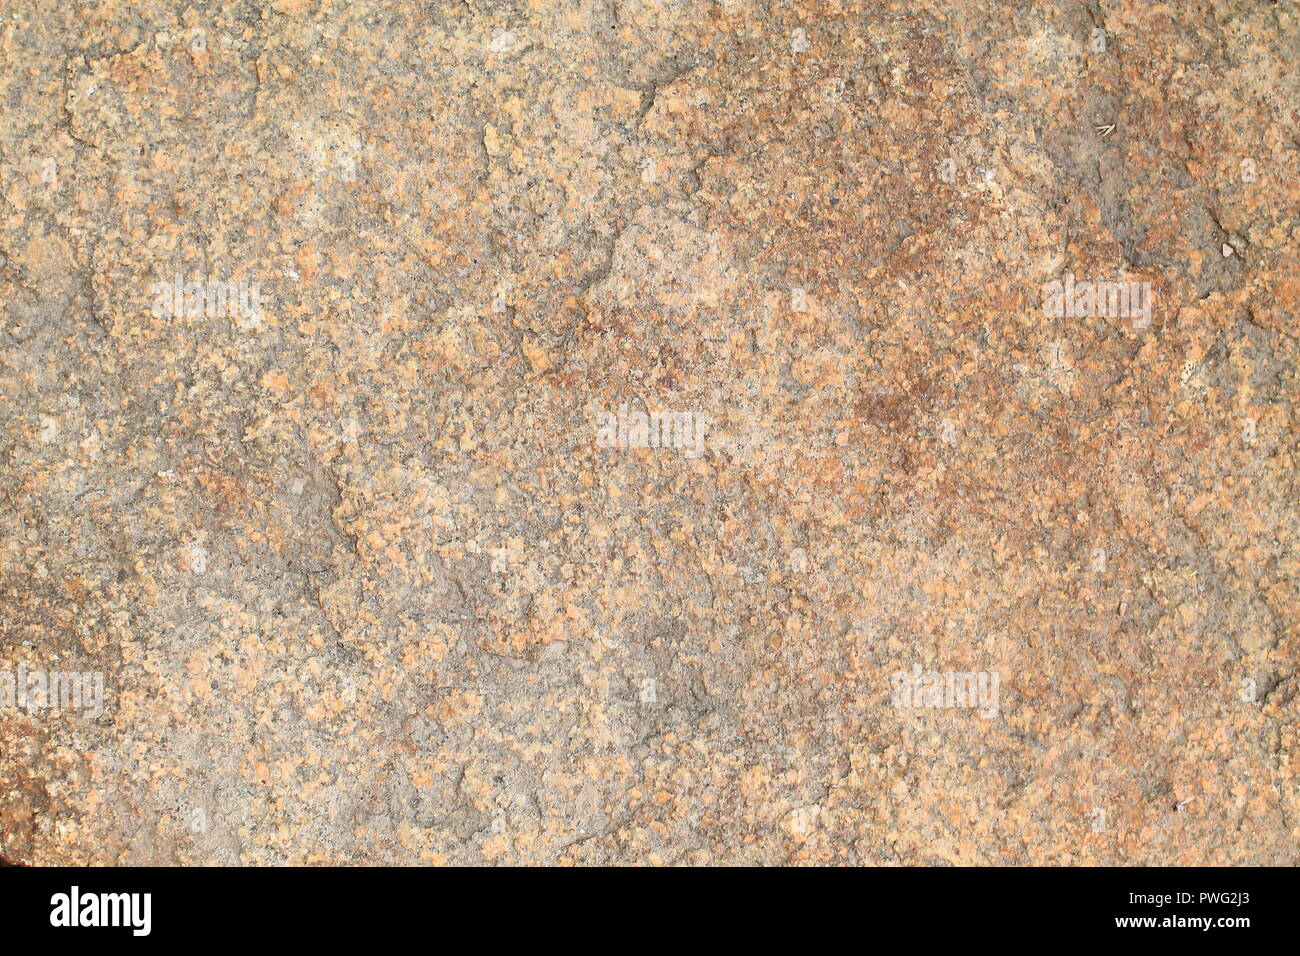 Abstract natural rock stone texture design background Stock Photo